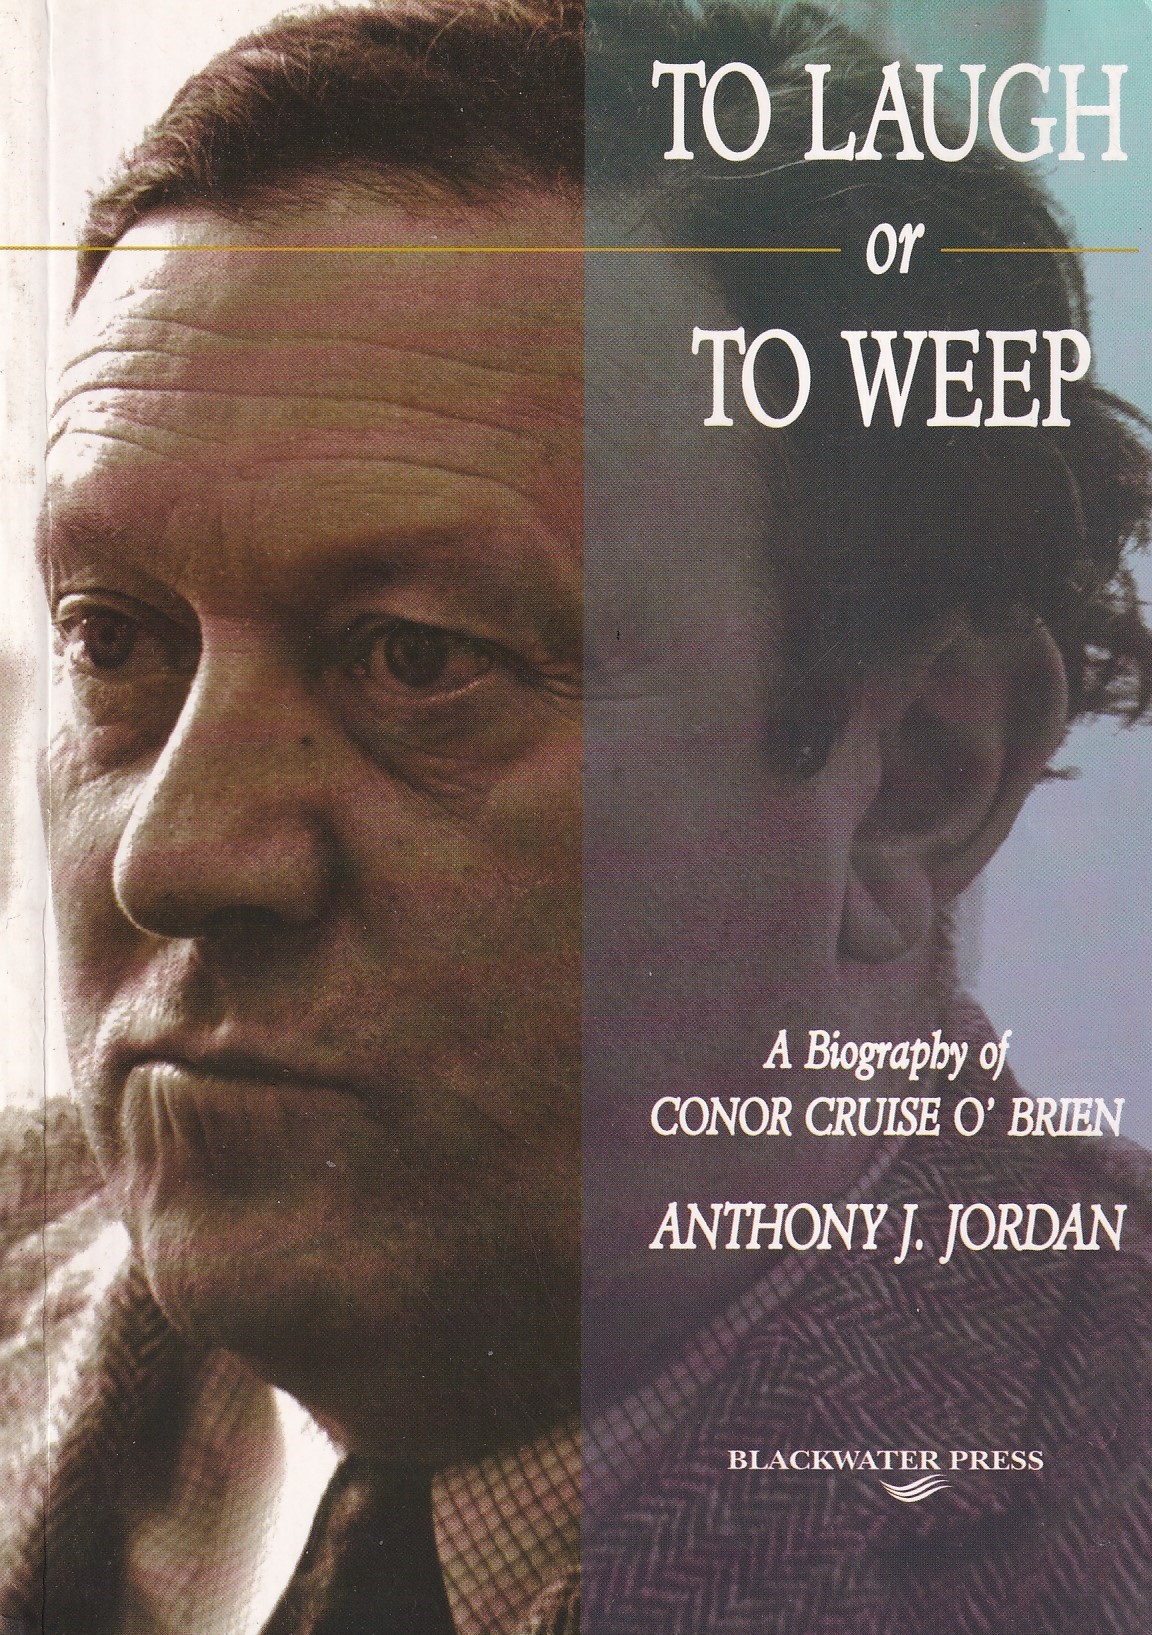 To Laugh or to Weep: A Biography of Conor Cruise O’Brien | Anthony J. Jordan | Charlie Byrne's